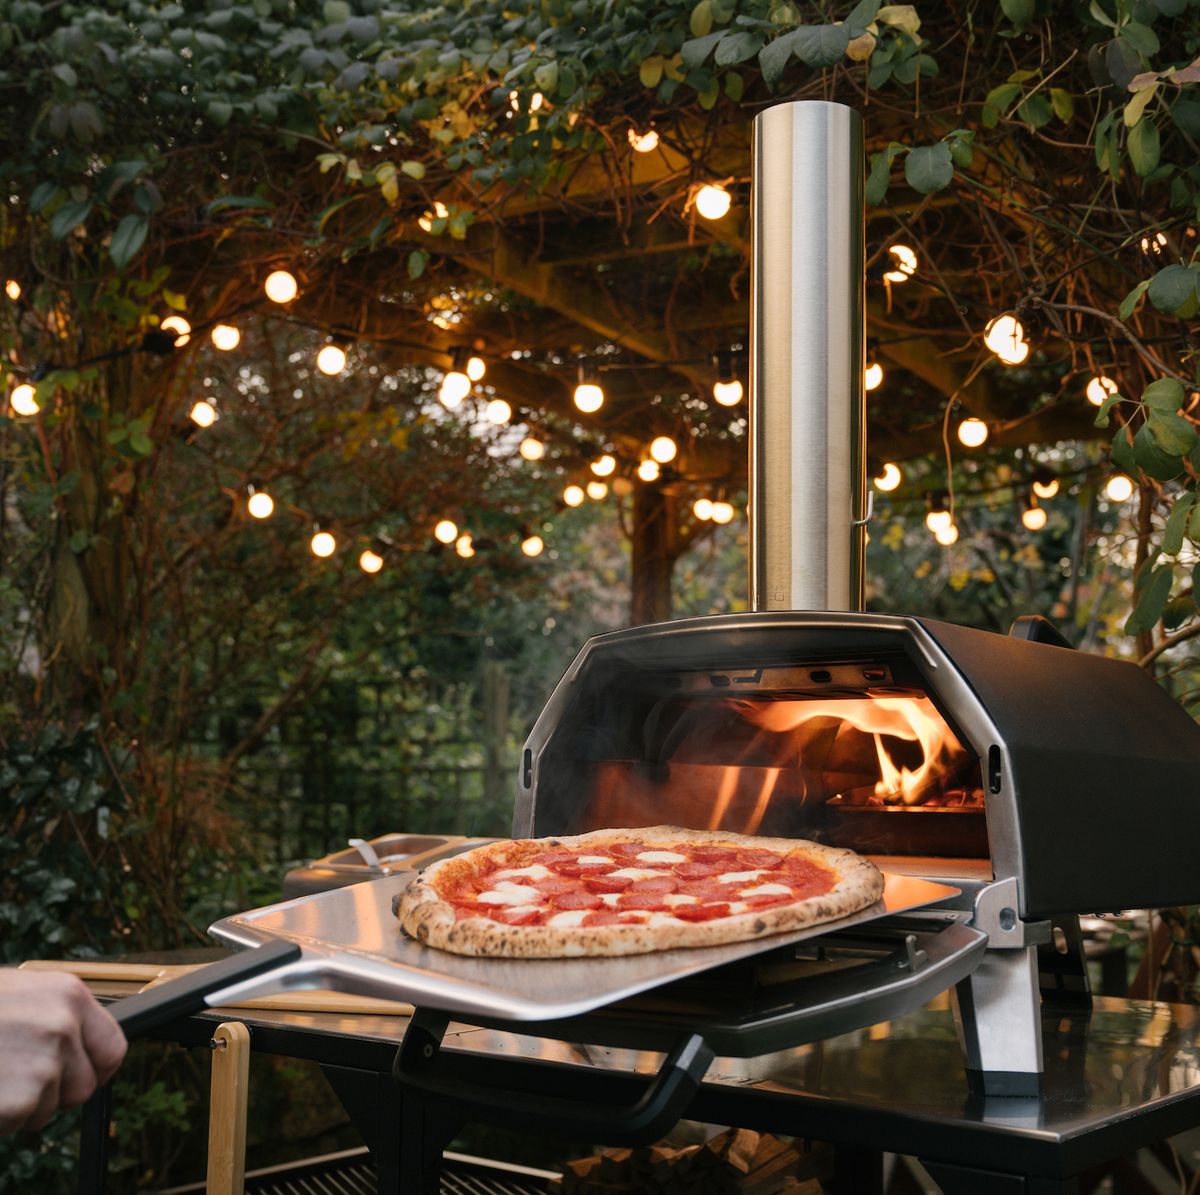 Ooni Pizza Oven Review, Tips, and Recipe